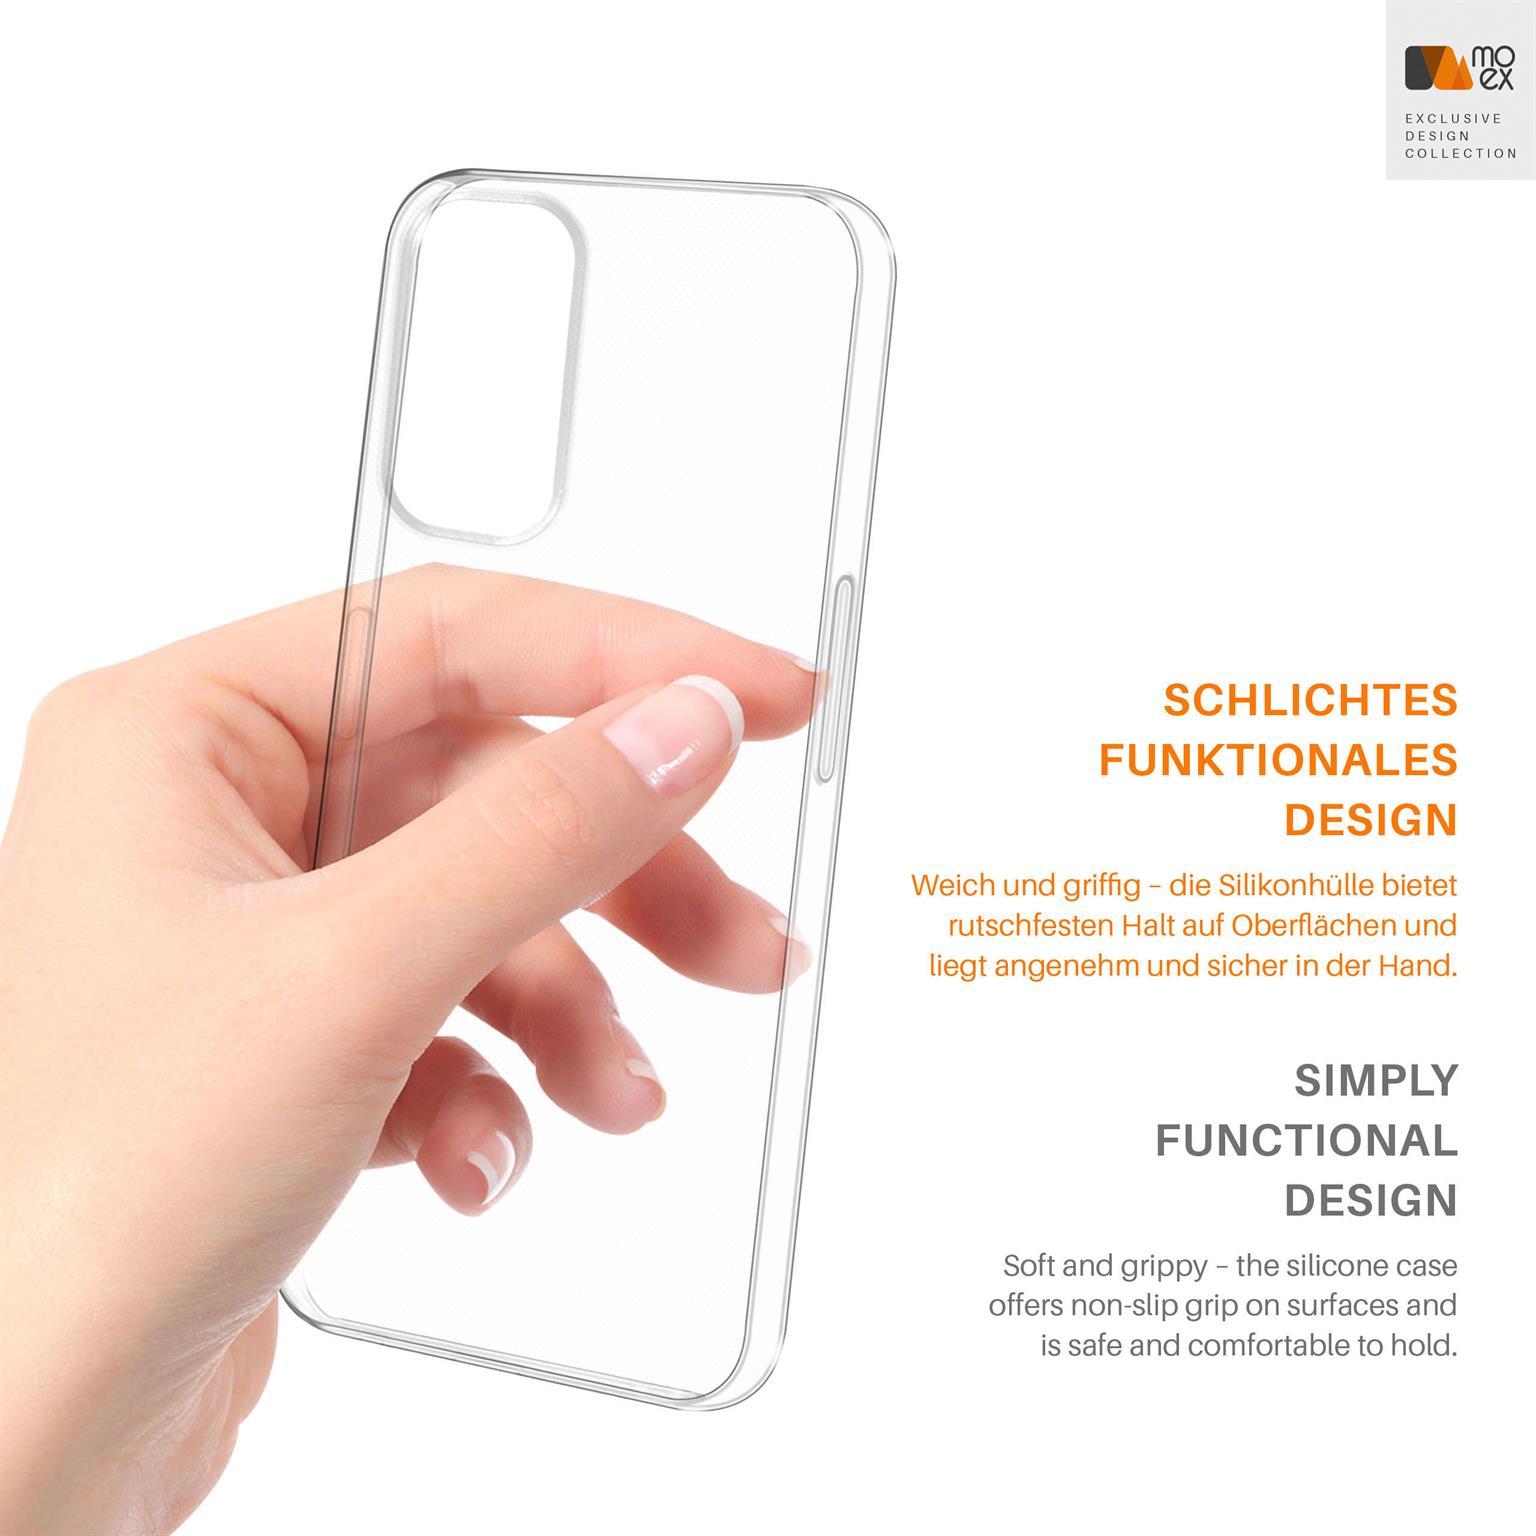 Backcover, Realme, Case, MOEX 7 Pro, Aero Crystal-Clear